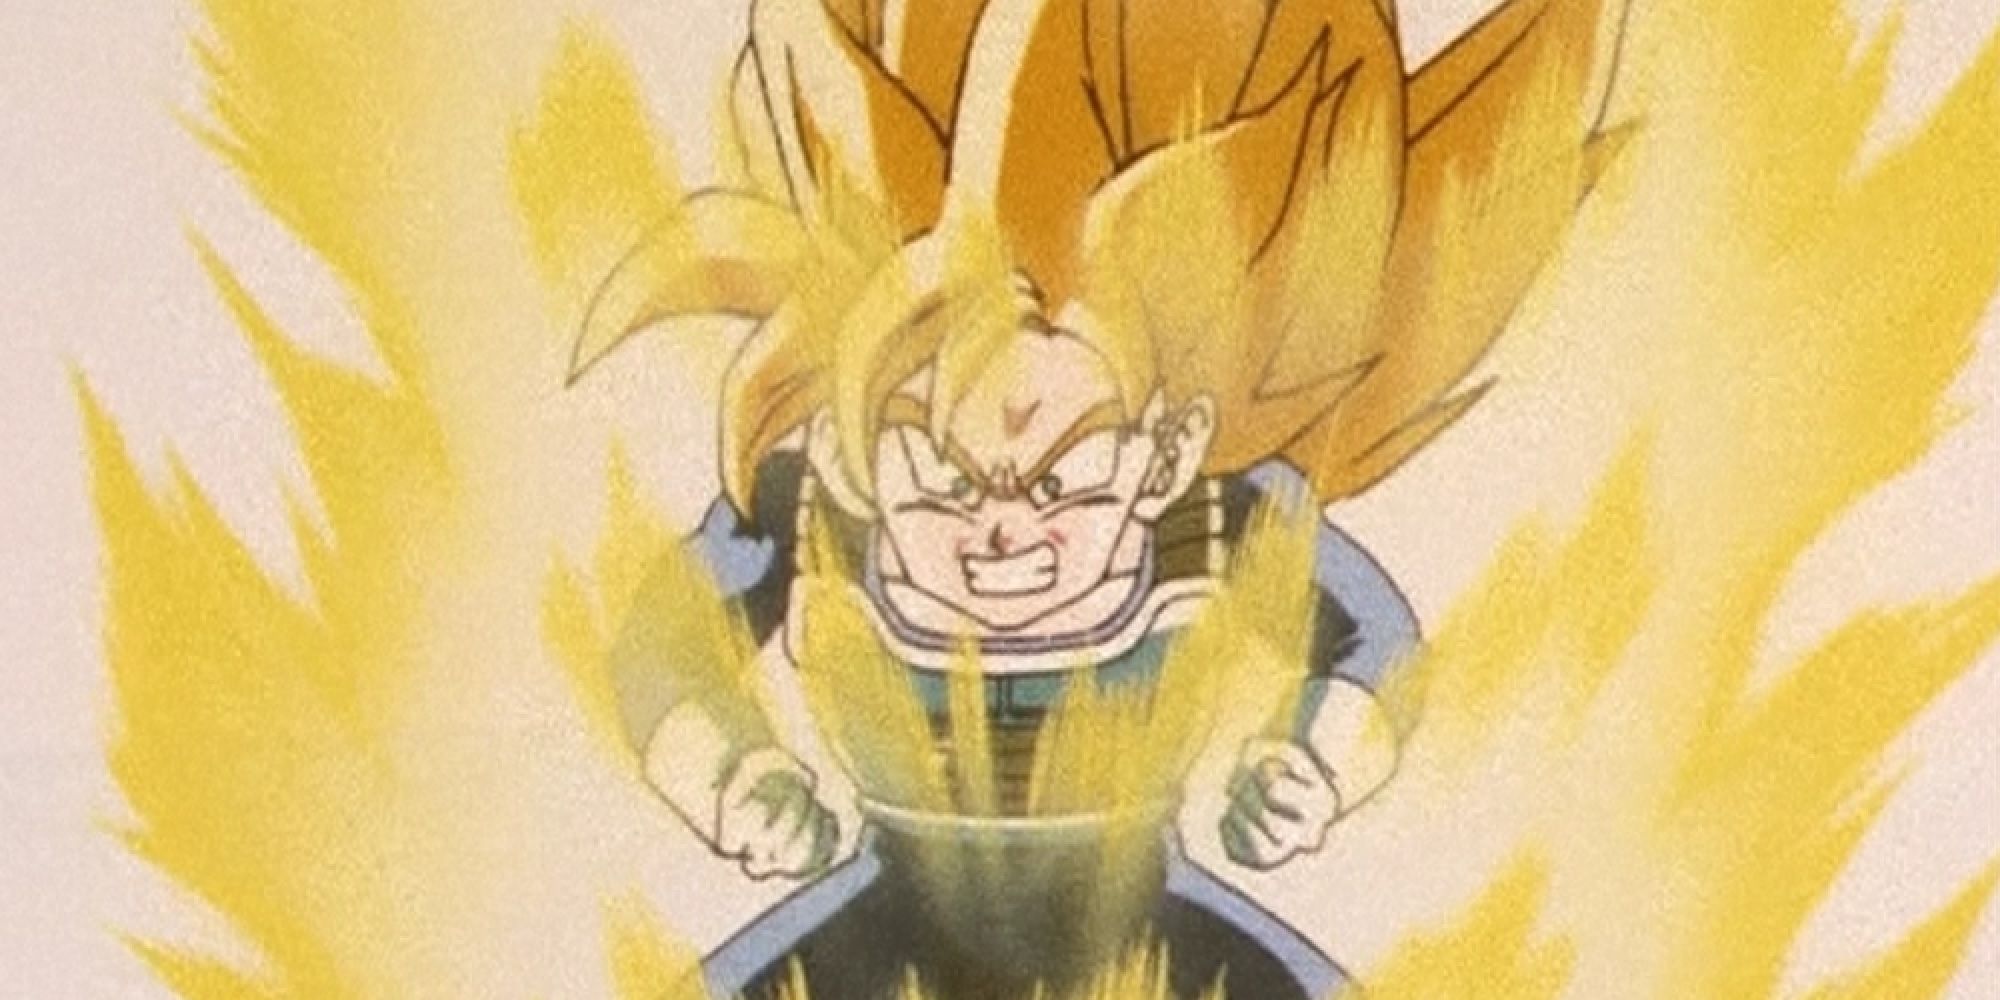 Gohan goes Super Saiyan for the first time in Dragon Ball Z